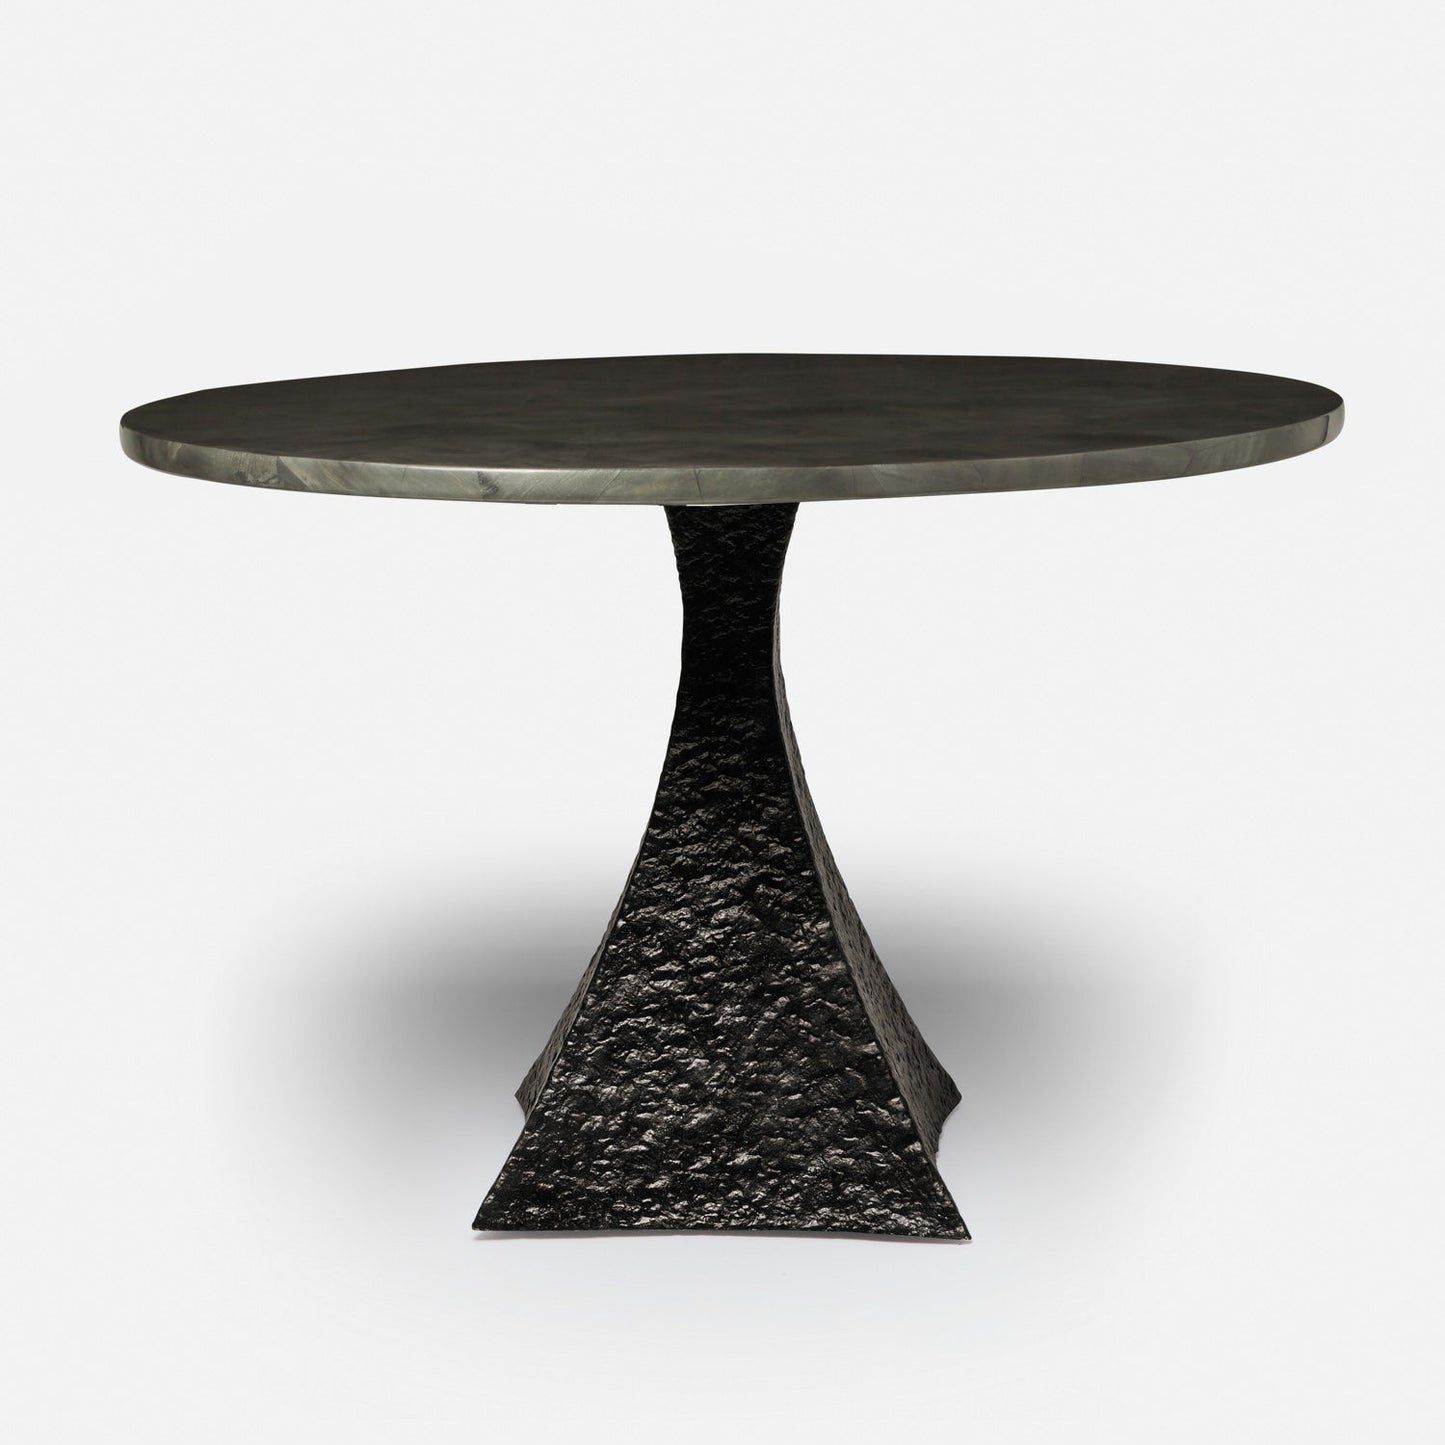 Made Goods Noor 54" x 30" Bumpy Black Iron Dinning Table With Round Pewter Faux Horn Table Top